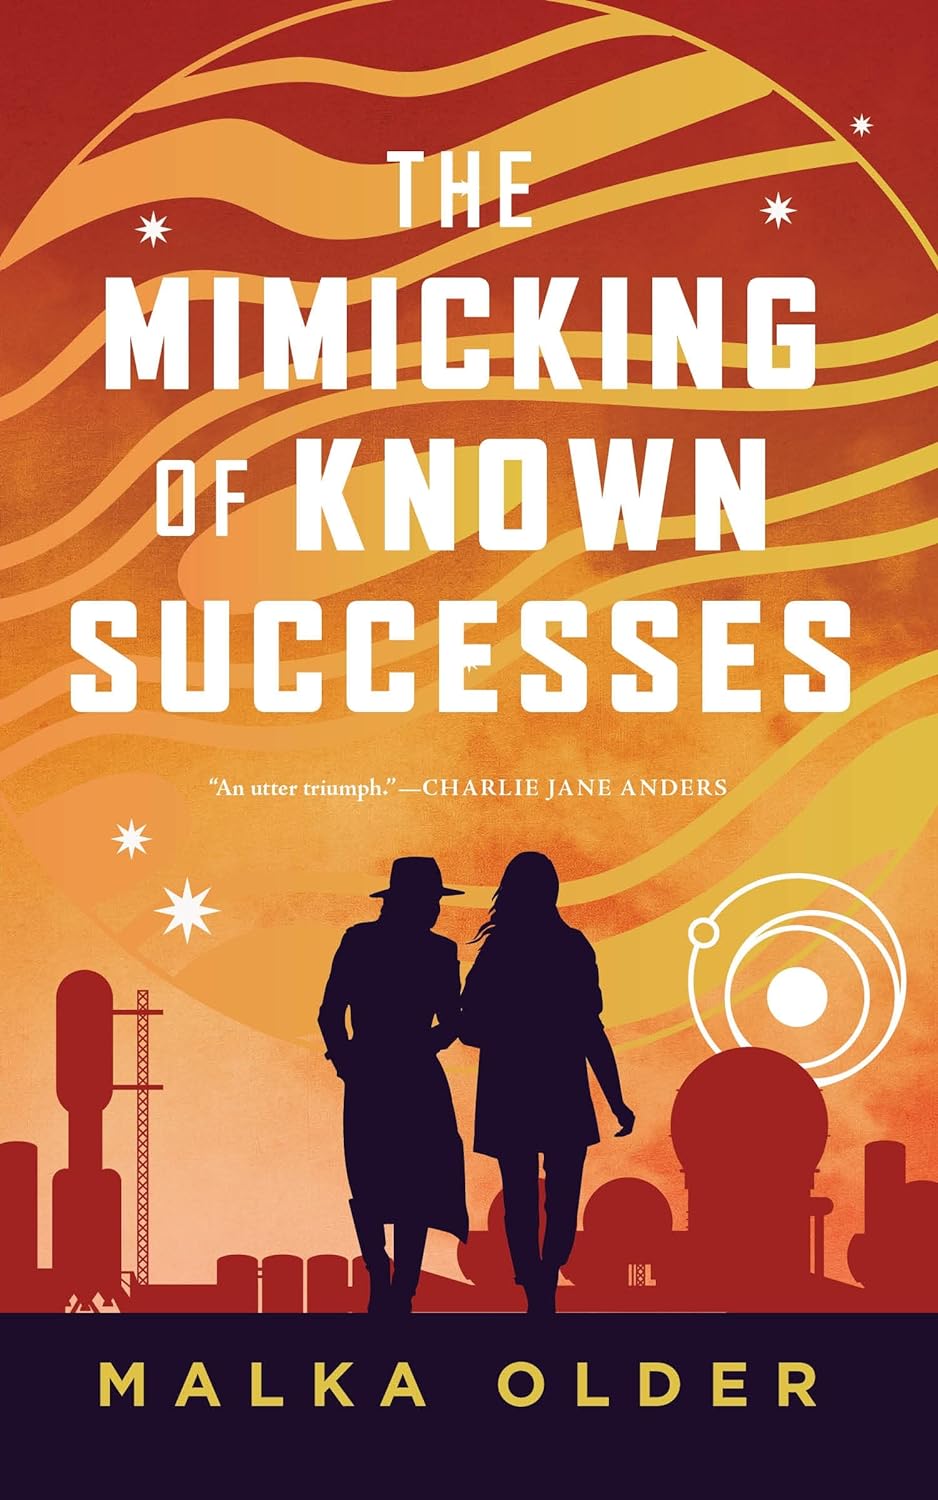 A book cover featuring the silhouettes of two people walking in a futuristic land